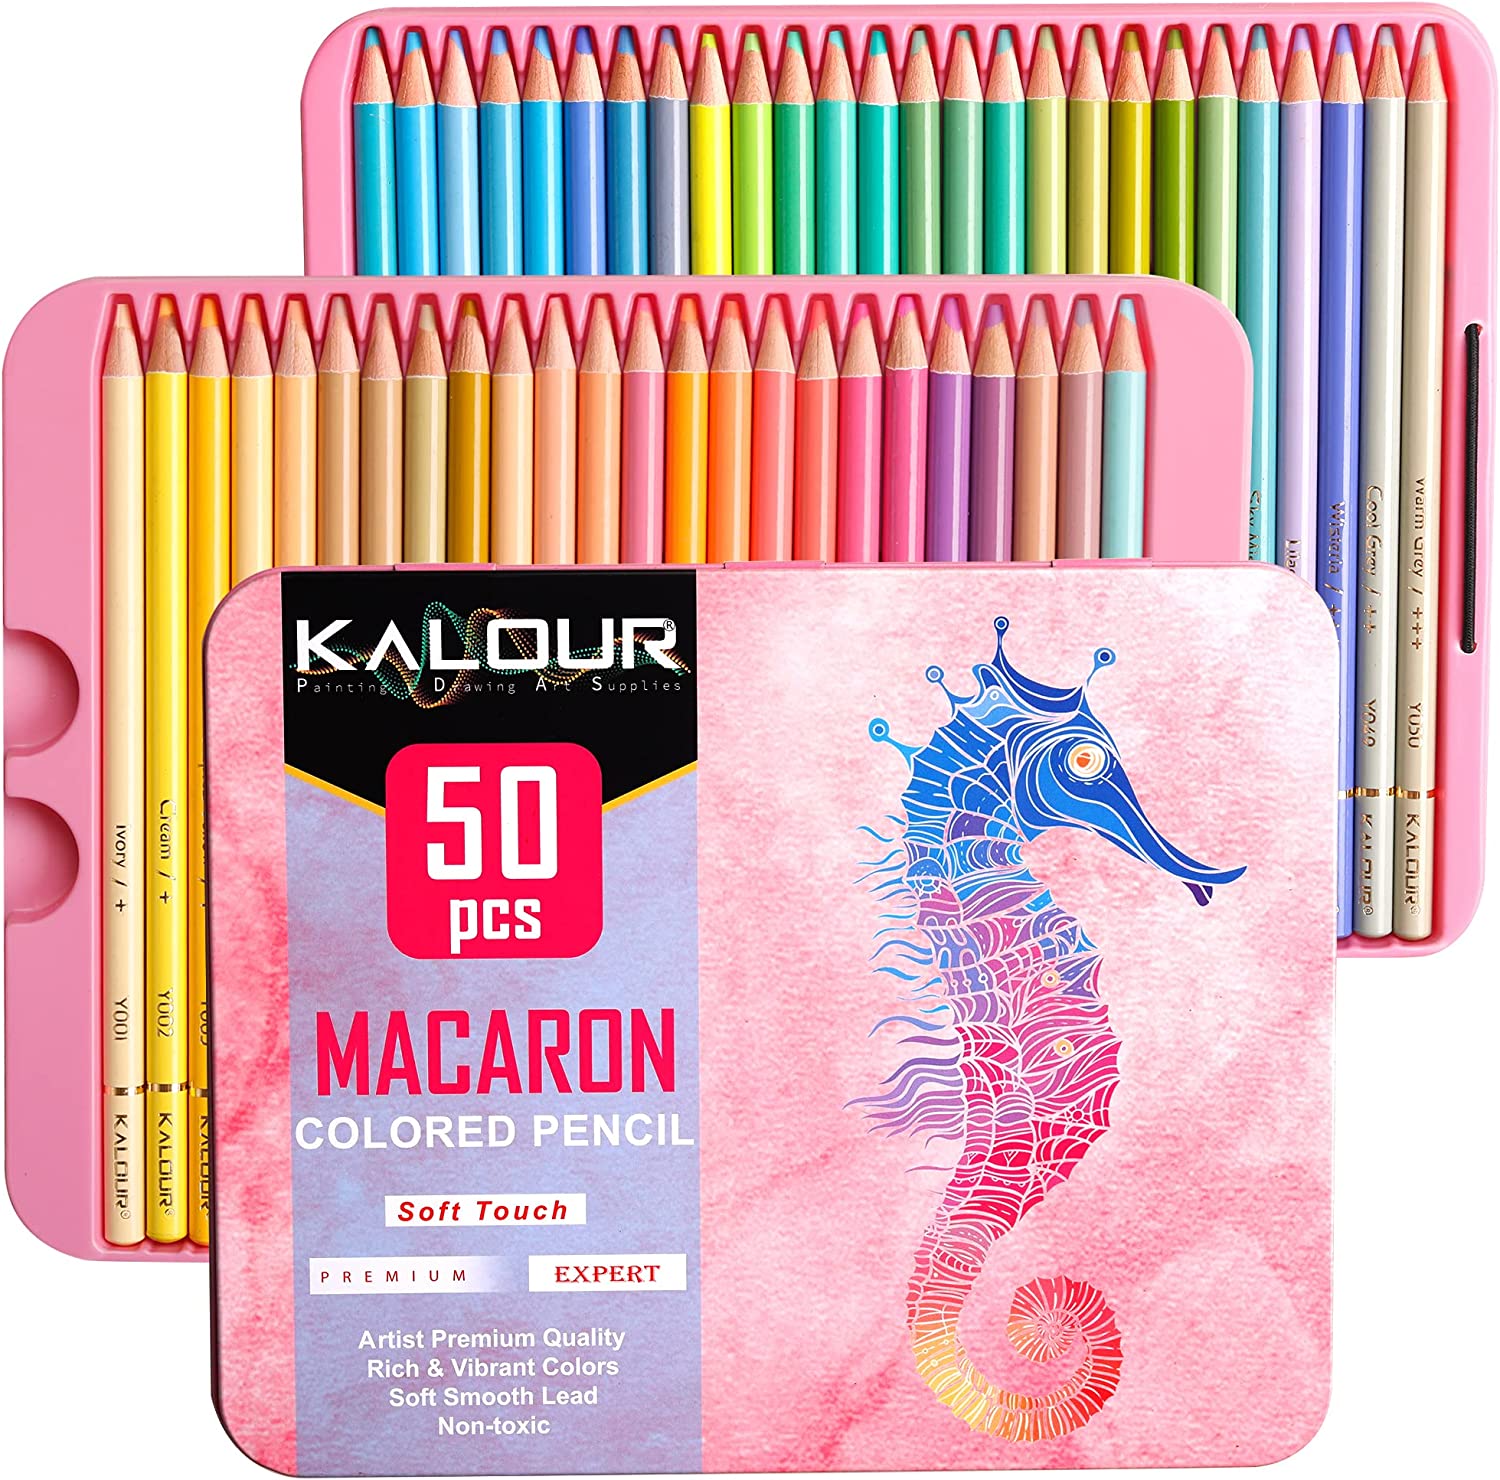 What's the Difference between the Macaron and Pastel Colored Pencil sets by  Brutfuner? 